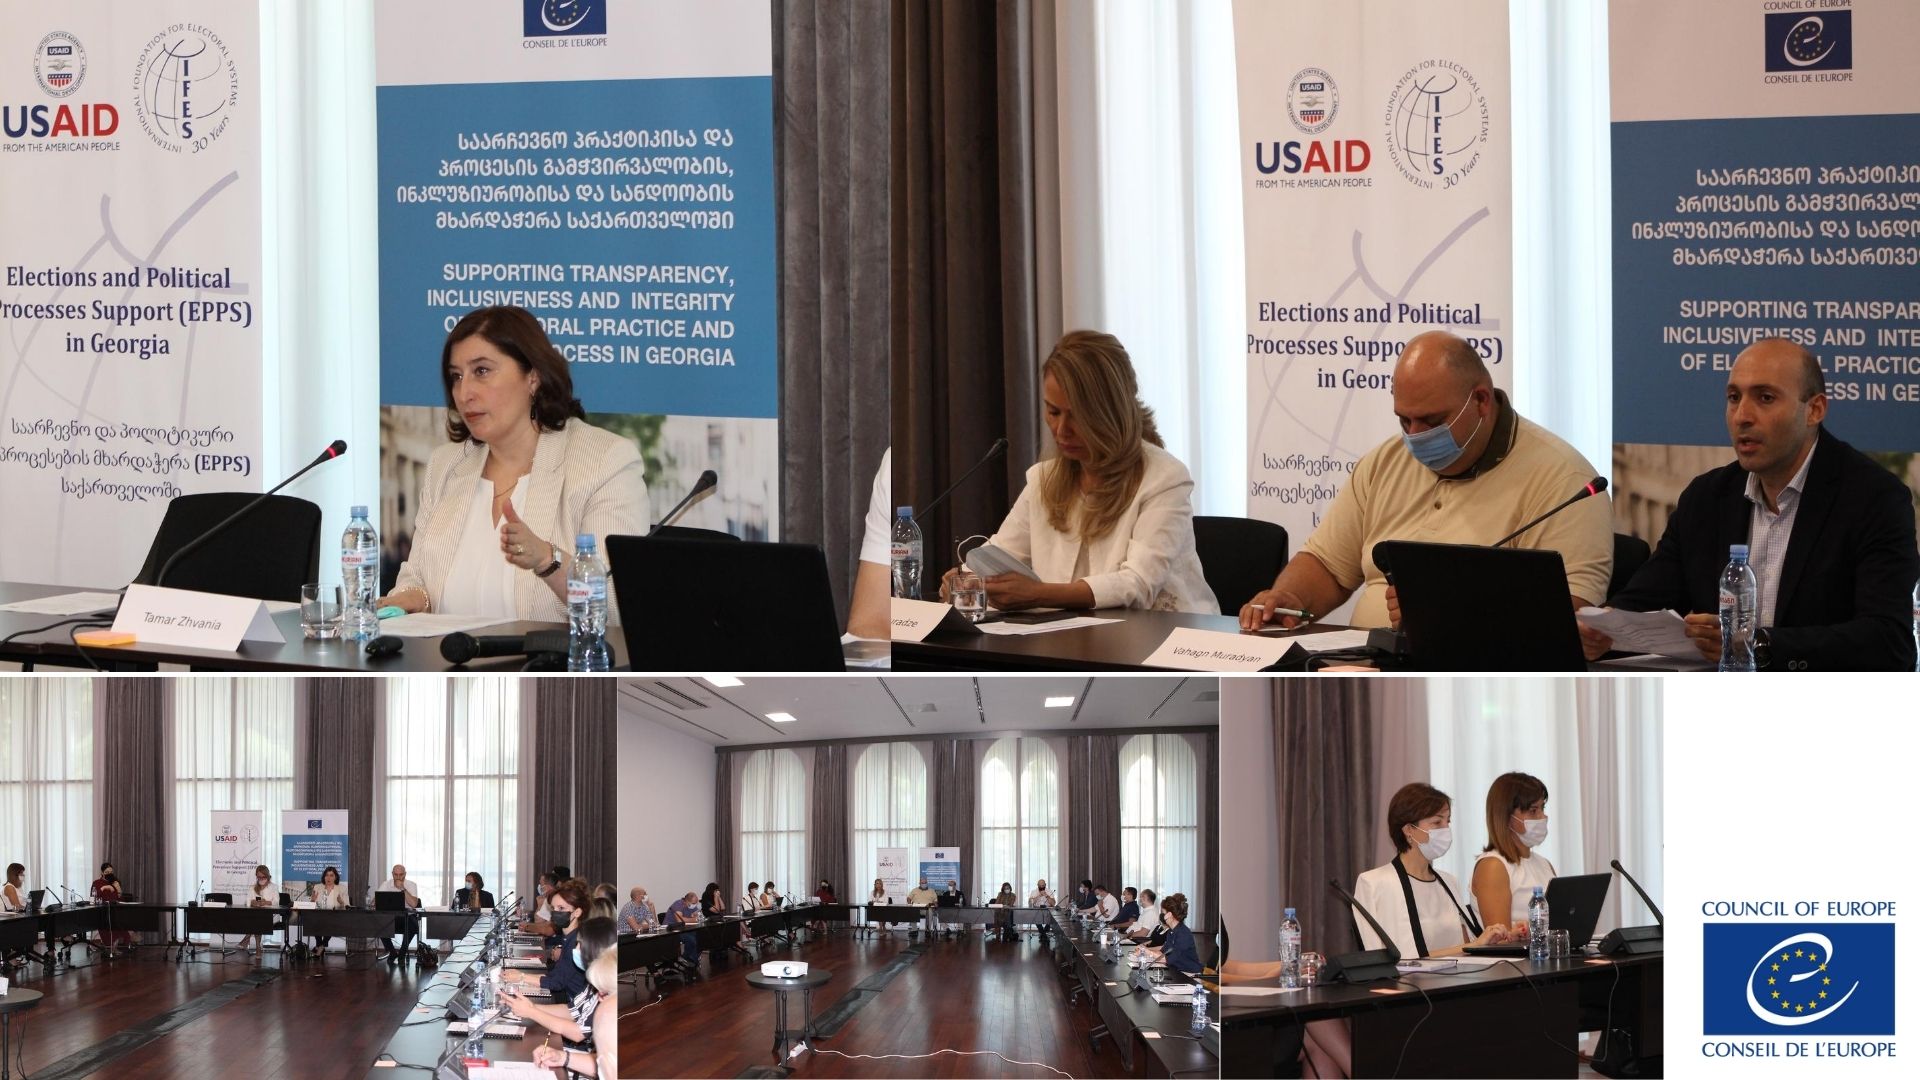 Training of trainers on electoral dispute resolution was conducted for the staff of the Central Election Commission of Georgia